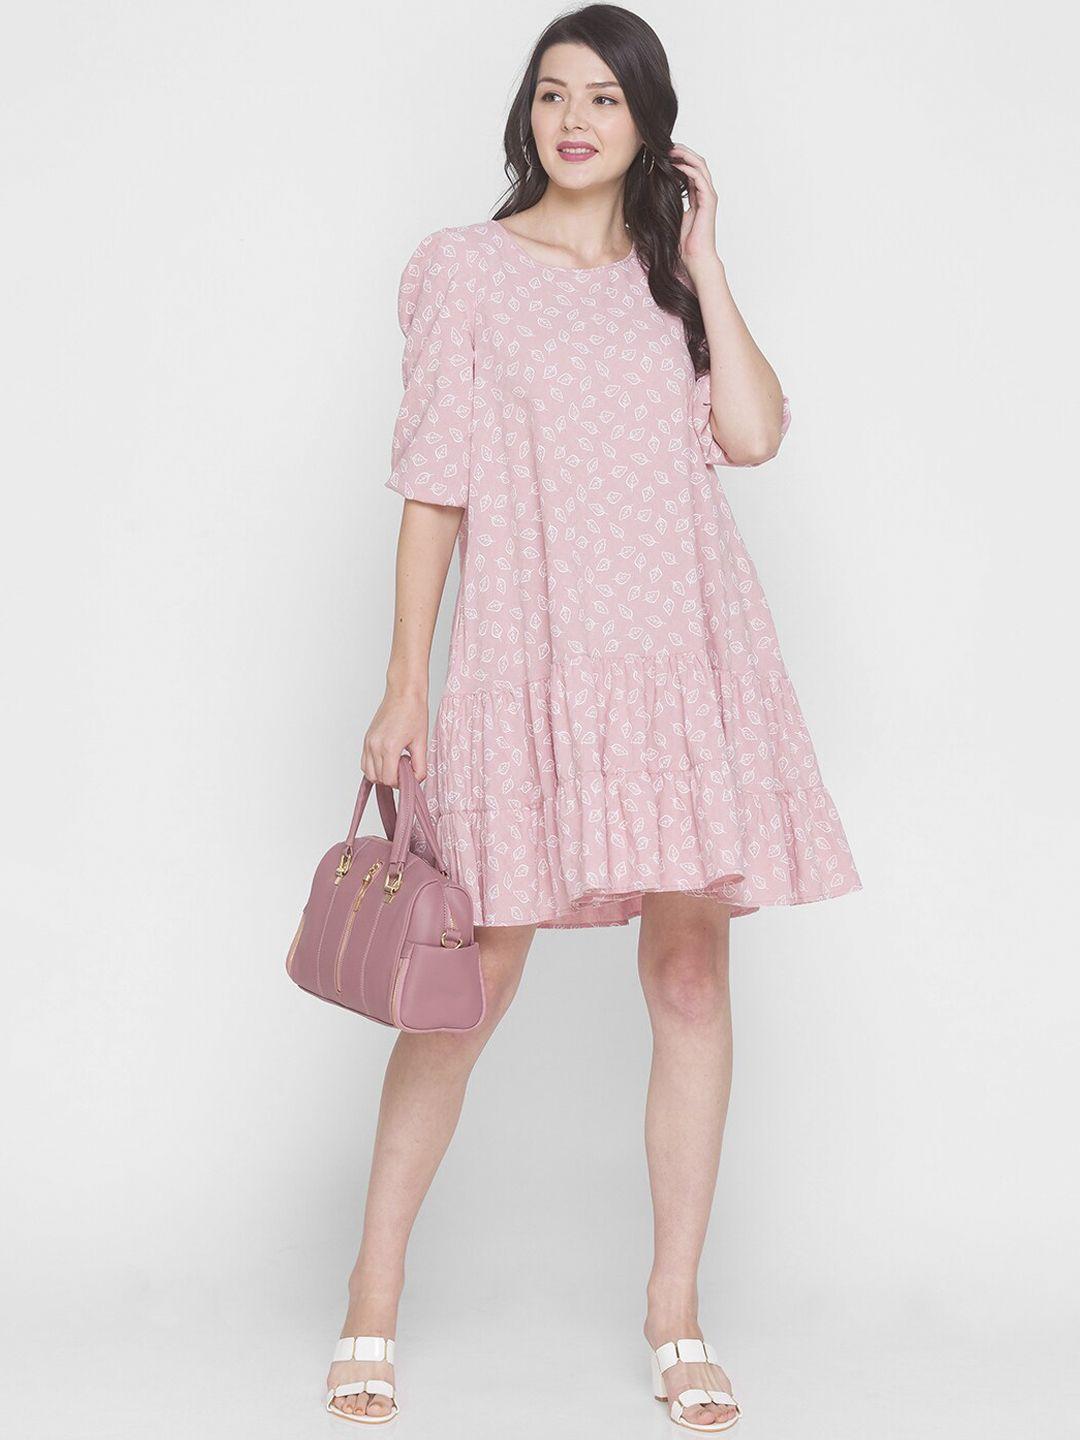 terquois-pink-floral-printed-a-line-dress